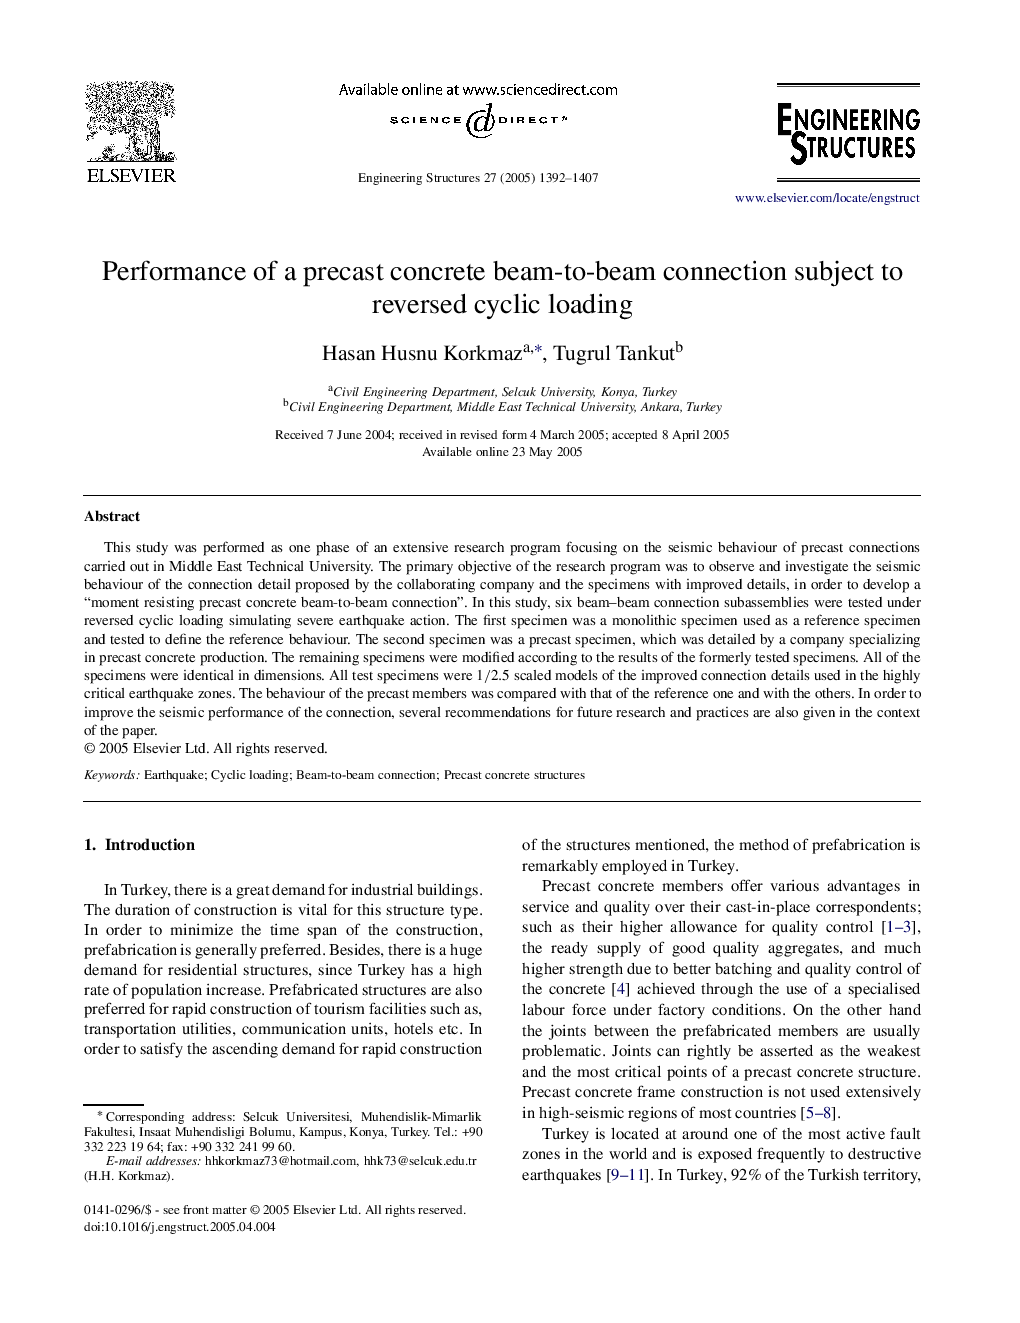 Performance of a precast concrete beam-to-beam connection subject to reversed cyclic loading